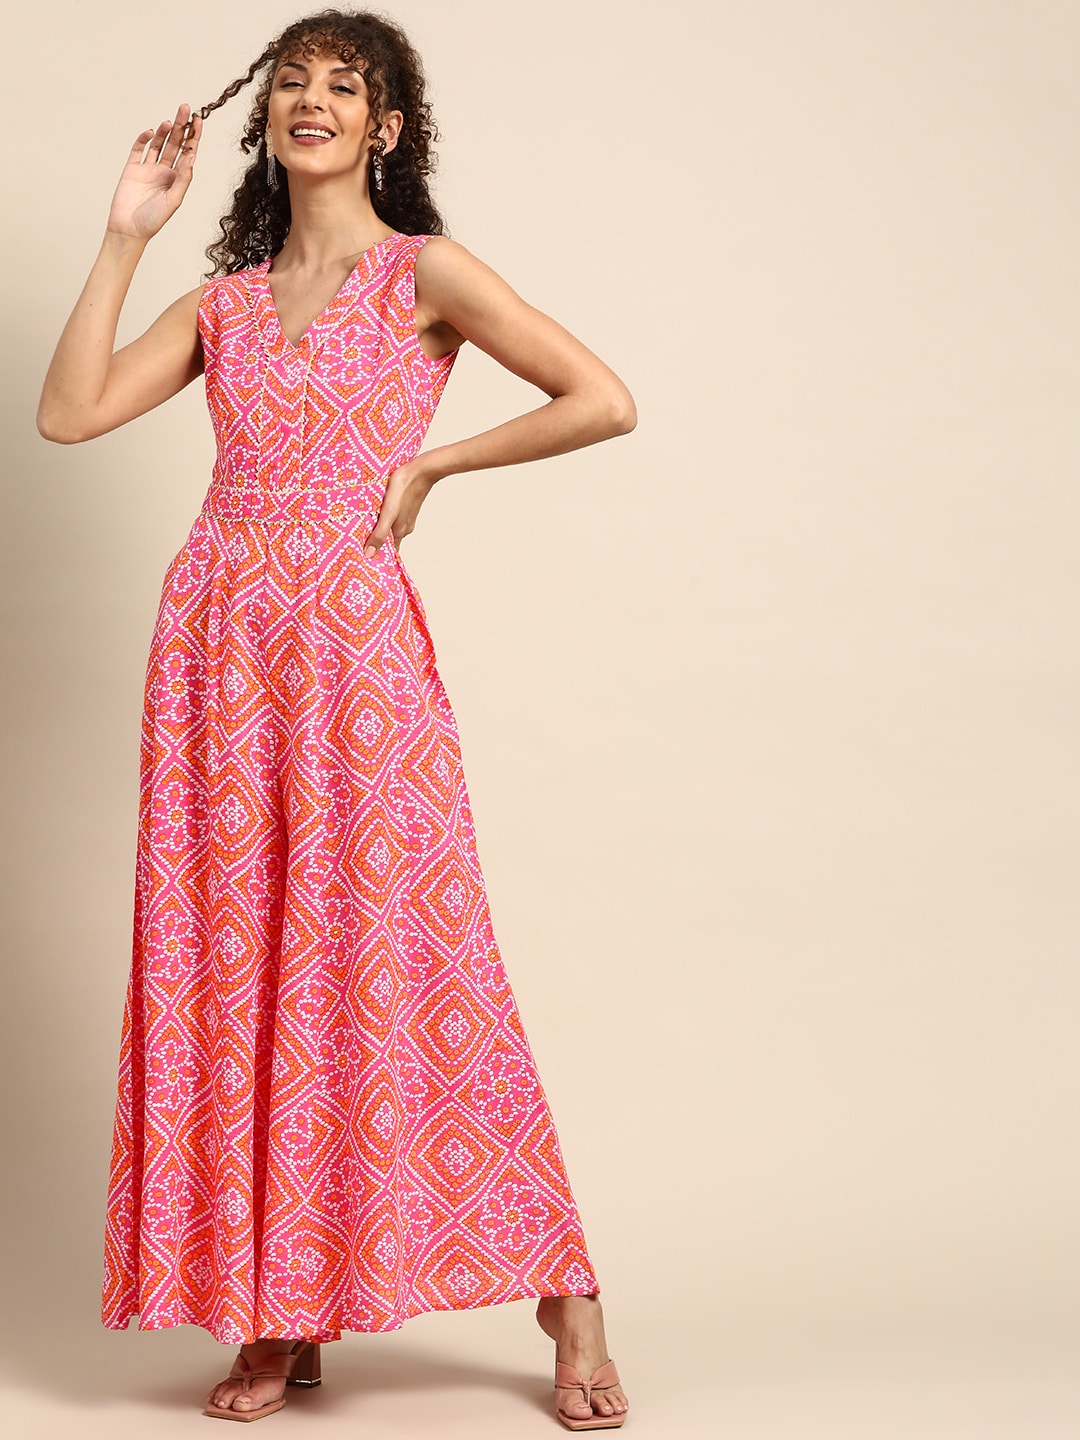 MABISH by Sonal Jain Ethnic Motifs Printed Ethnic Jumpsuit Price in India